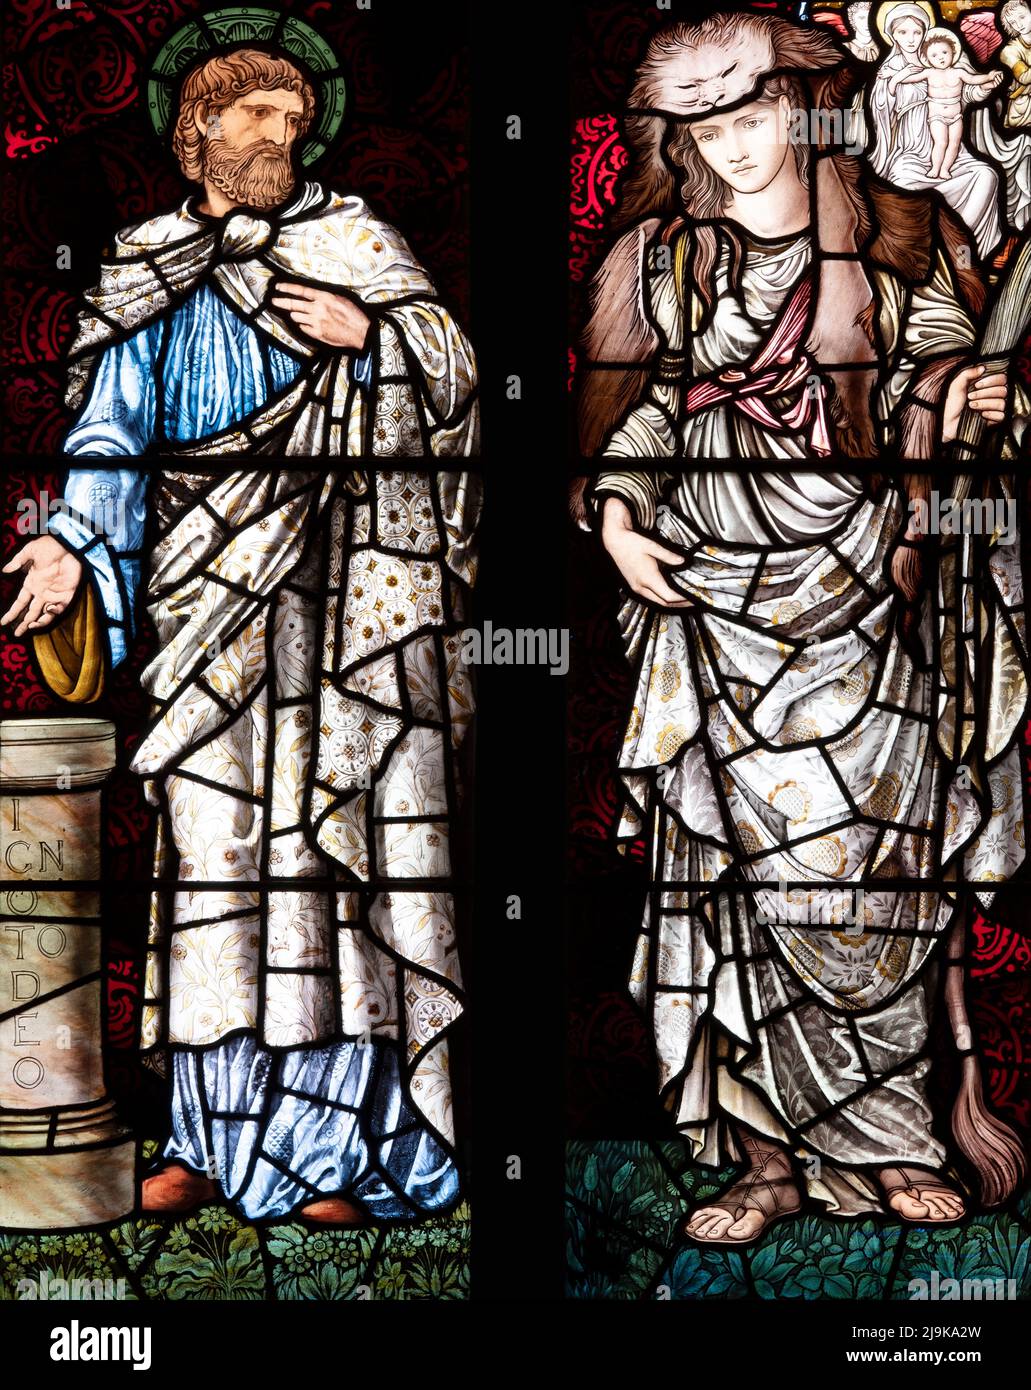 Detail from stained glass depicting the Christian message told and foretold by St Paul and the Tiburtine Sybl 'Albunea', Irton Church, Cumbria, UK Stock Photo